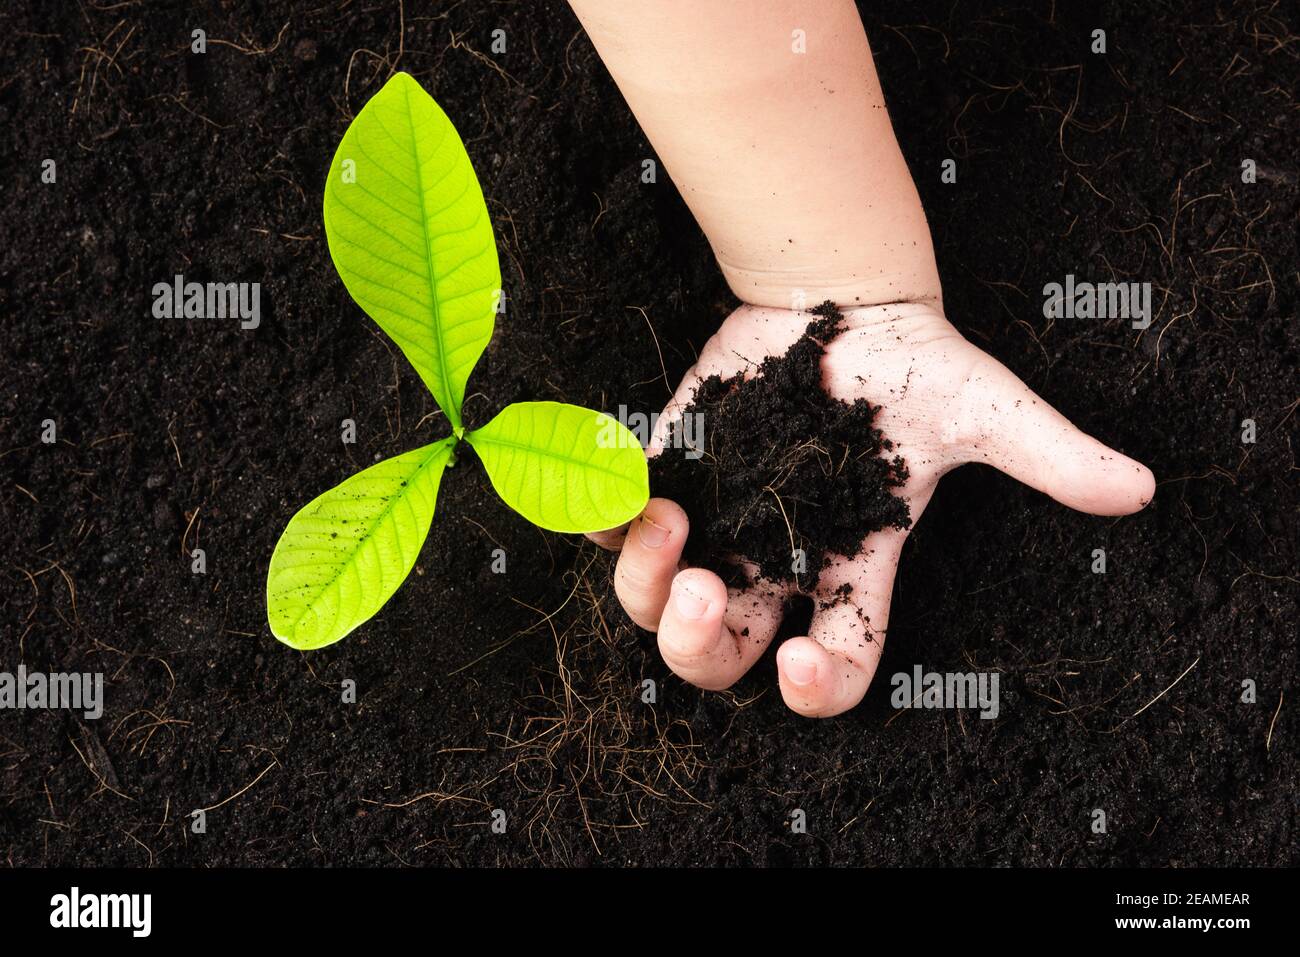 little seedling young tree in black soil on child's hands Stock Photo